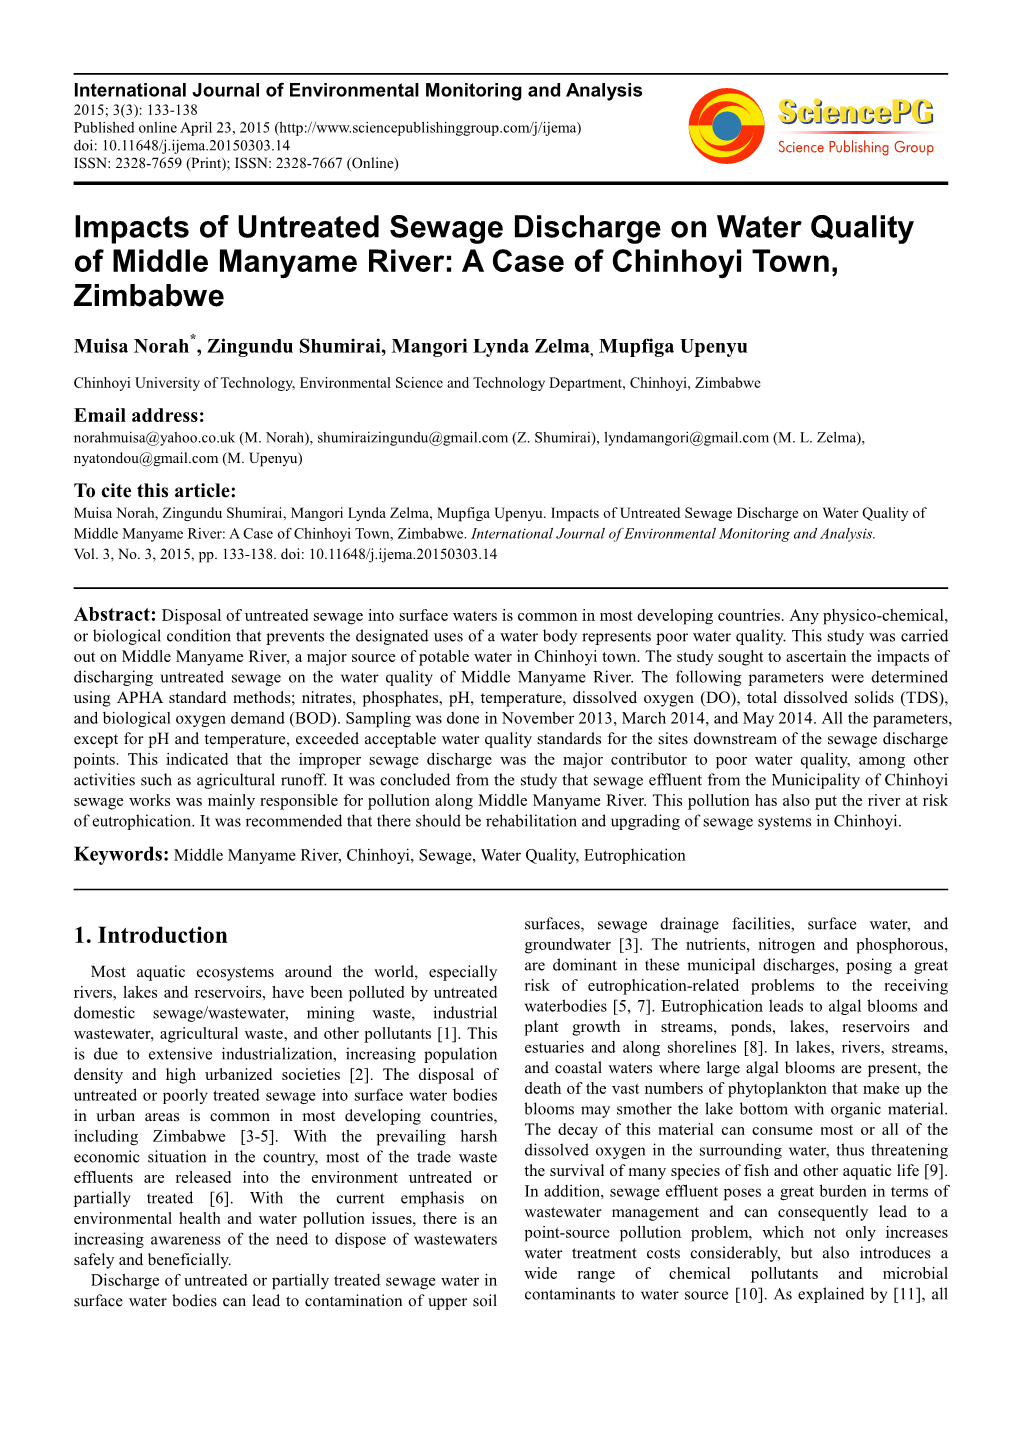 Impacts of Untreated Sewage Discharge on Water Quality of Middle Manyame River: a Case of Chinhoyi Town, Zimbabwe